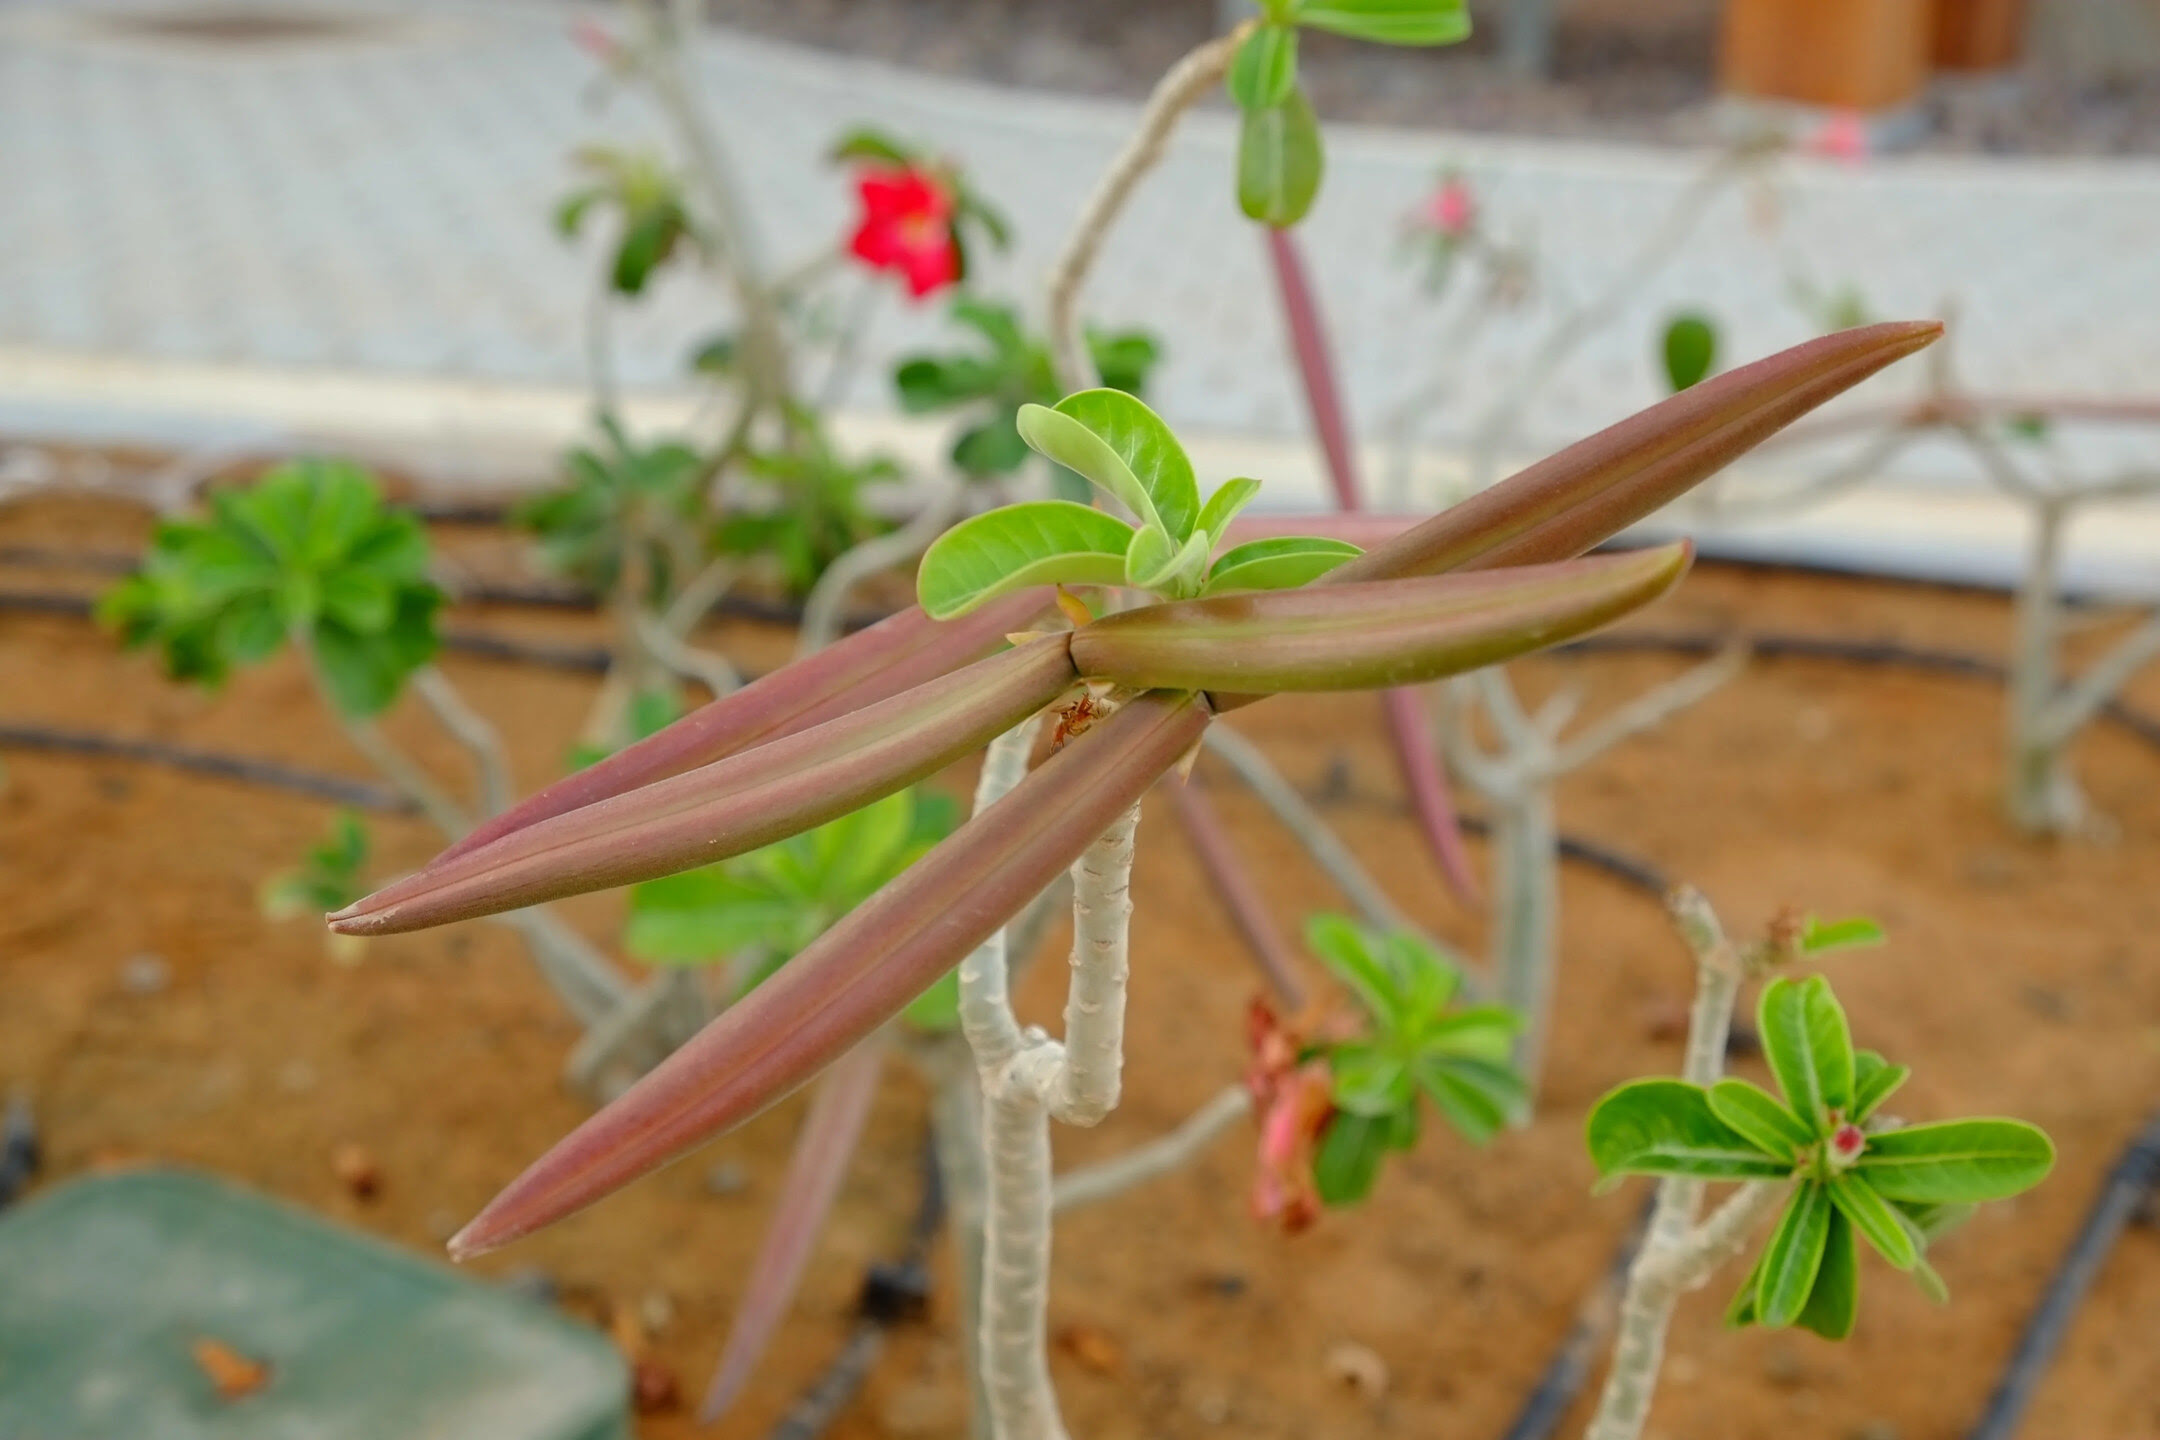 When Are Desert Rose Seed Pods Ready